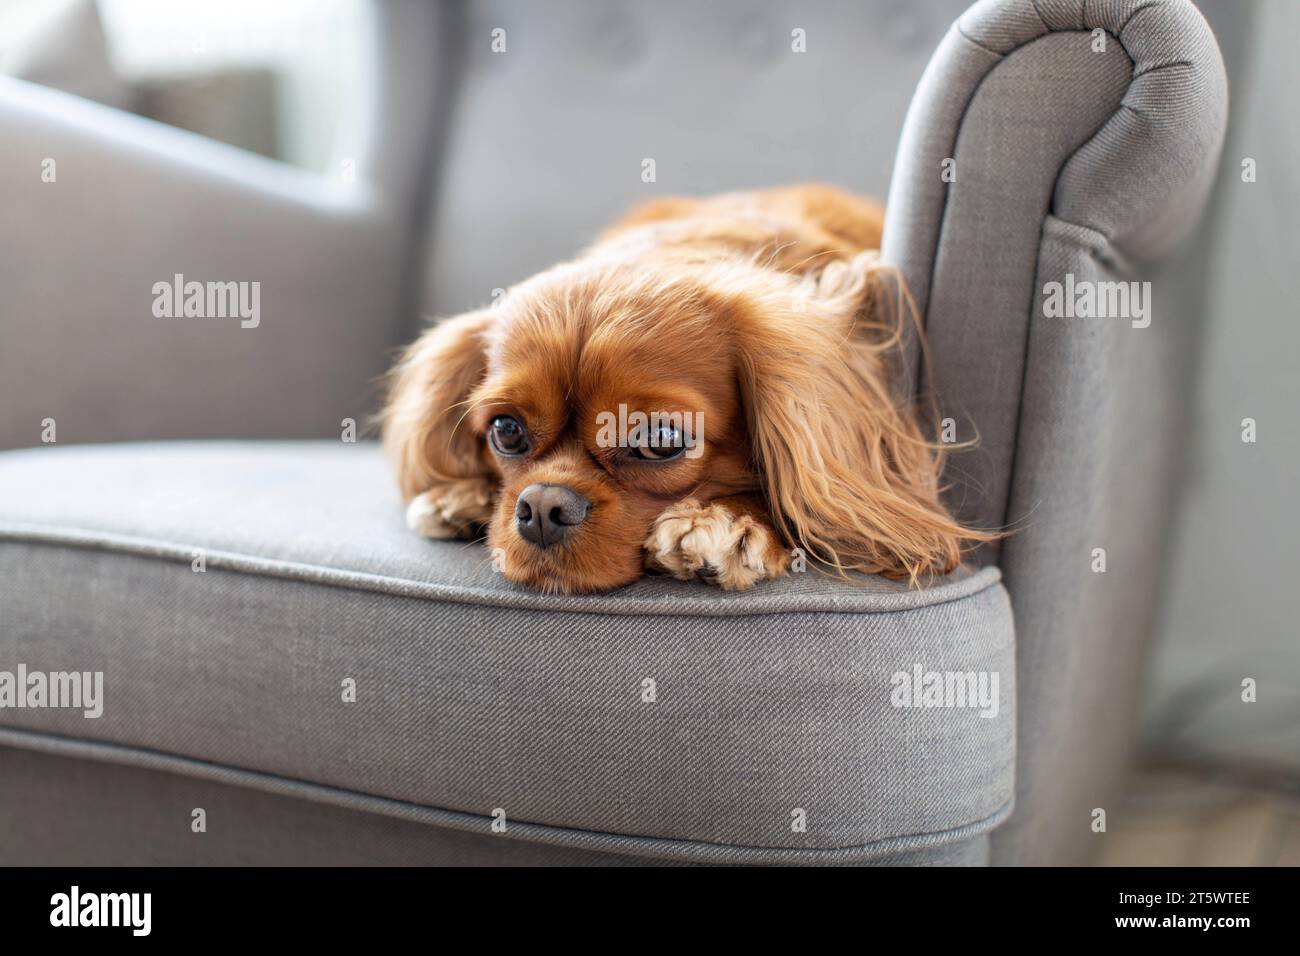 Cute dog napping on the armchair Stock Photo